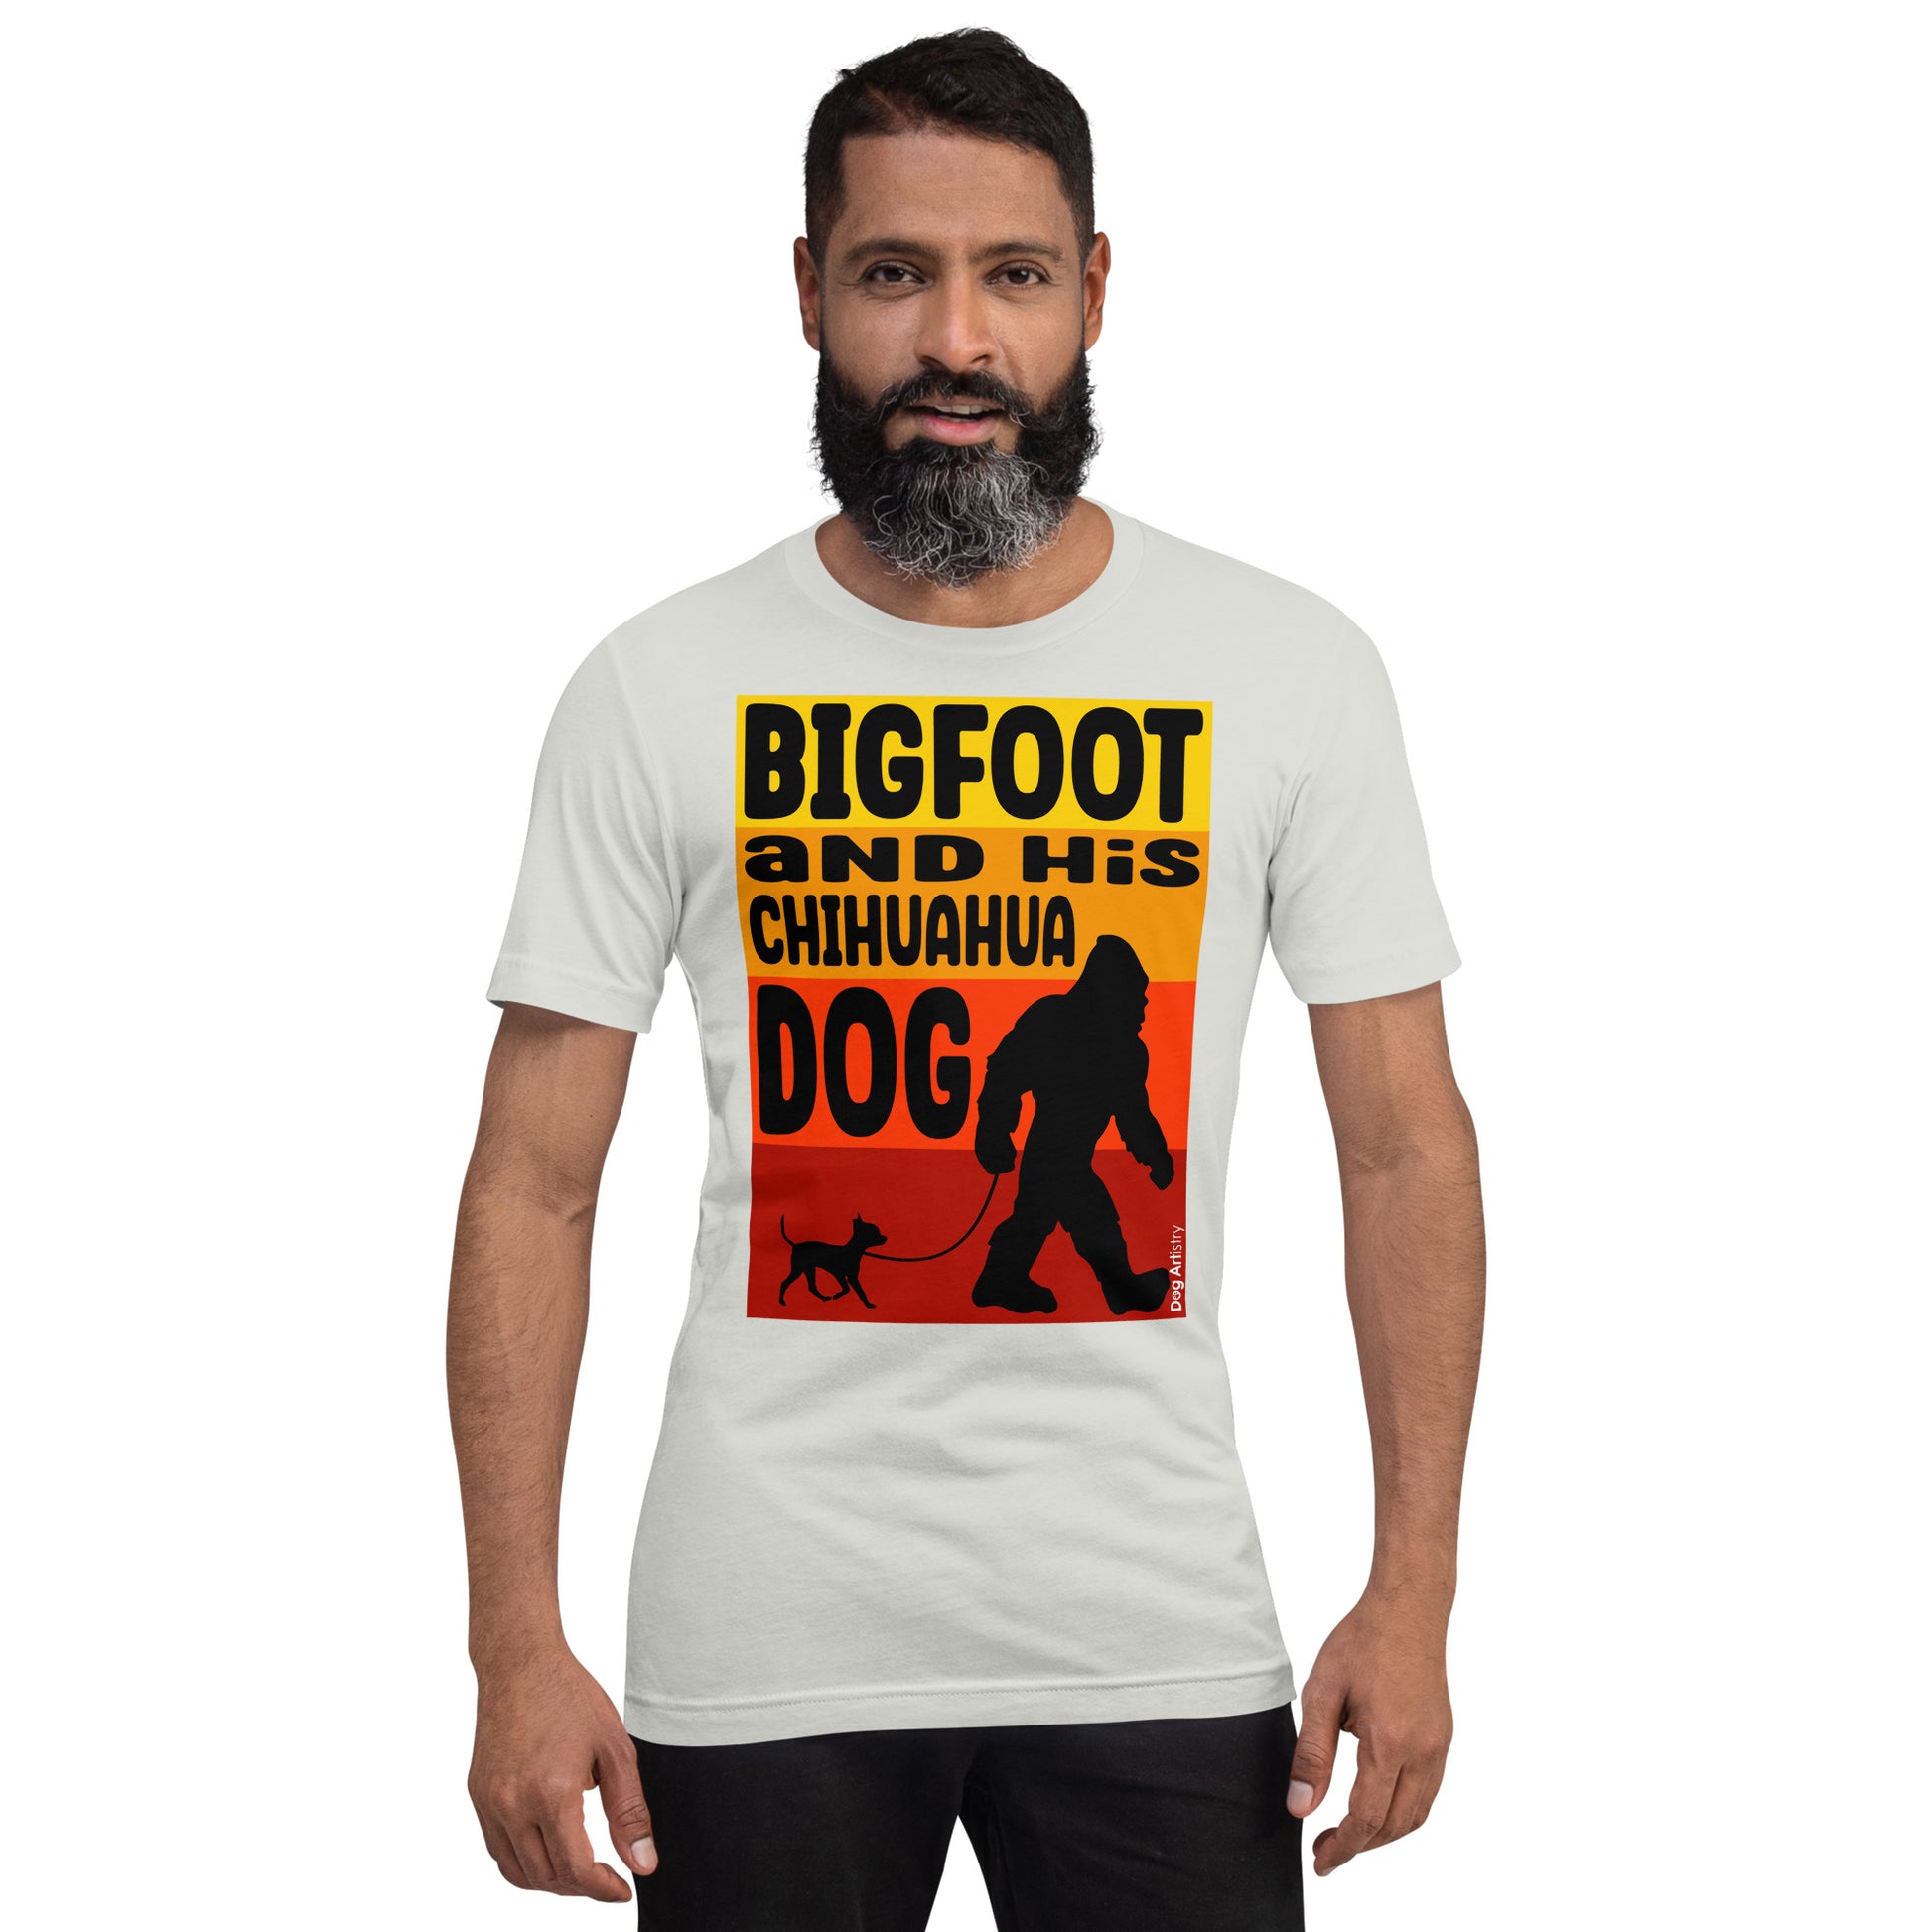 Big foot and his Chihuahua dog unisex silver t-shirt by Dog Artistry.